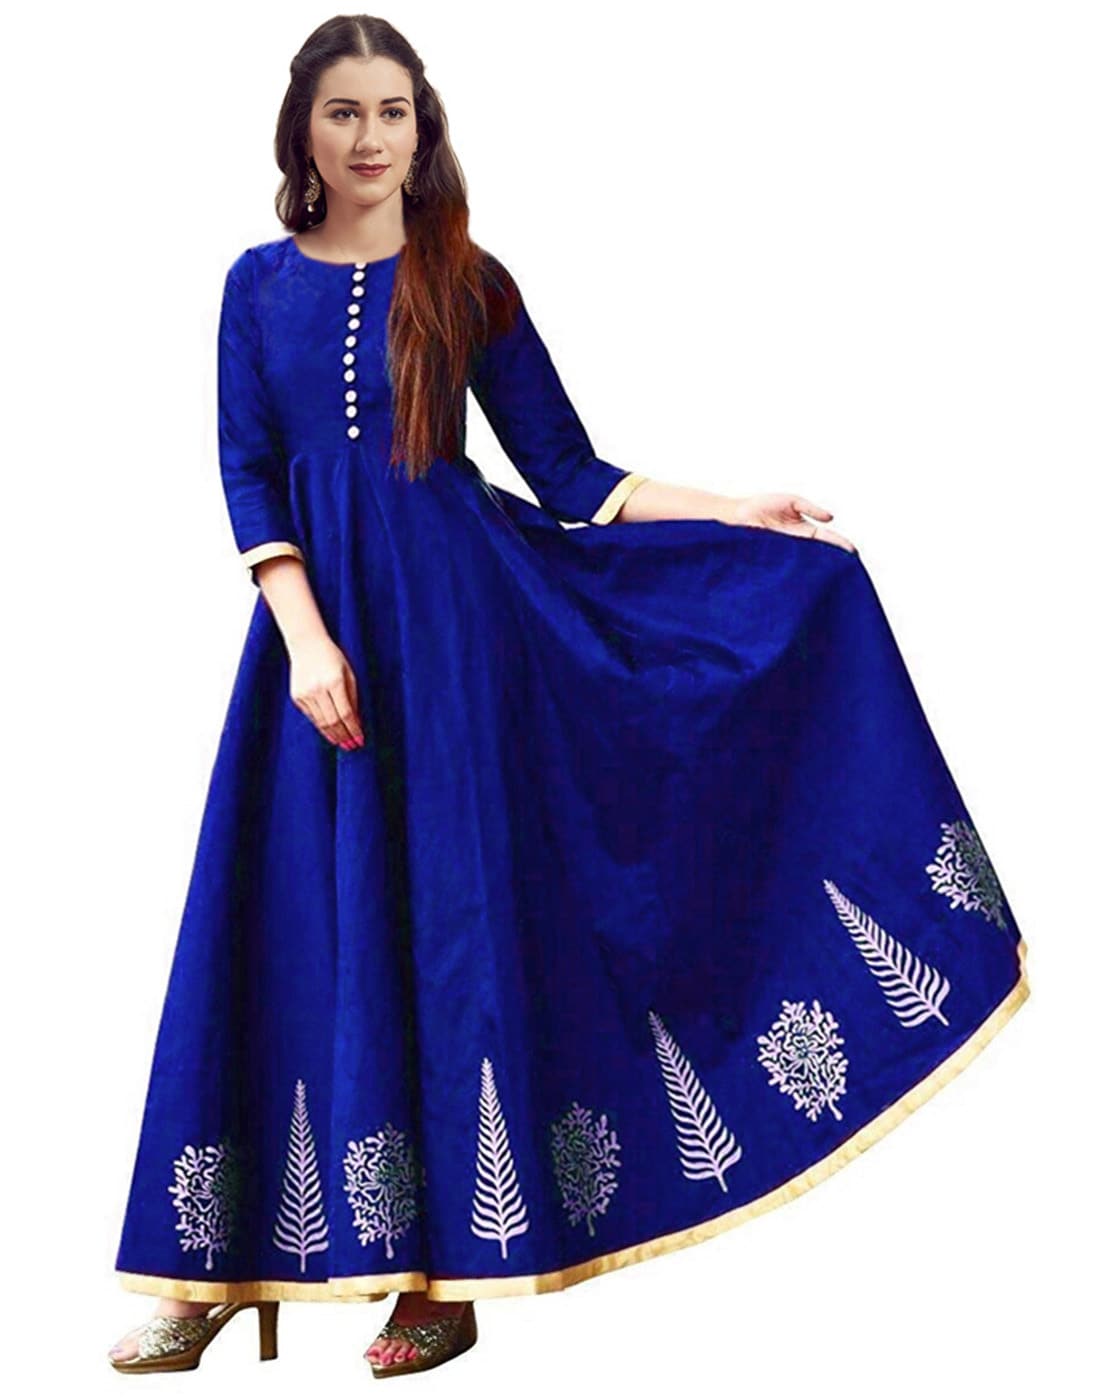 TT_7013RY - Girls Dress Style 7013 - ROYAL BLUE Short Gown with Gold  Embroidery Embellishments - Blue [All Shades] - Flower Girl Dresses -  Flower Girl Dress For Less